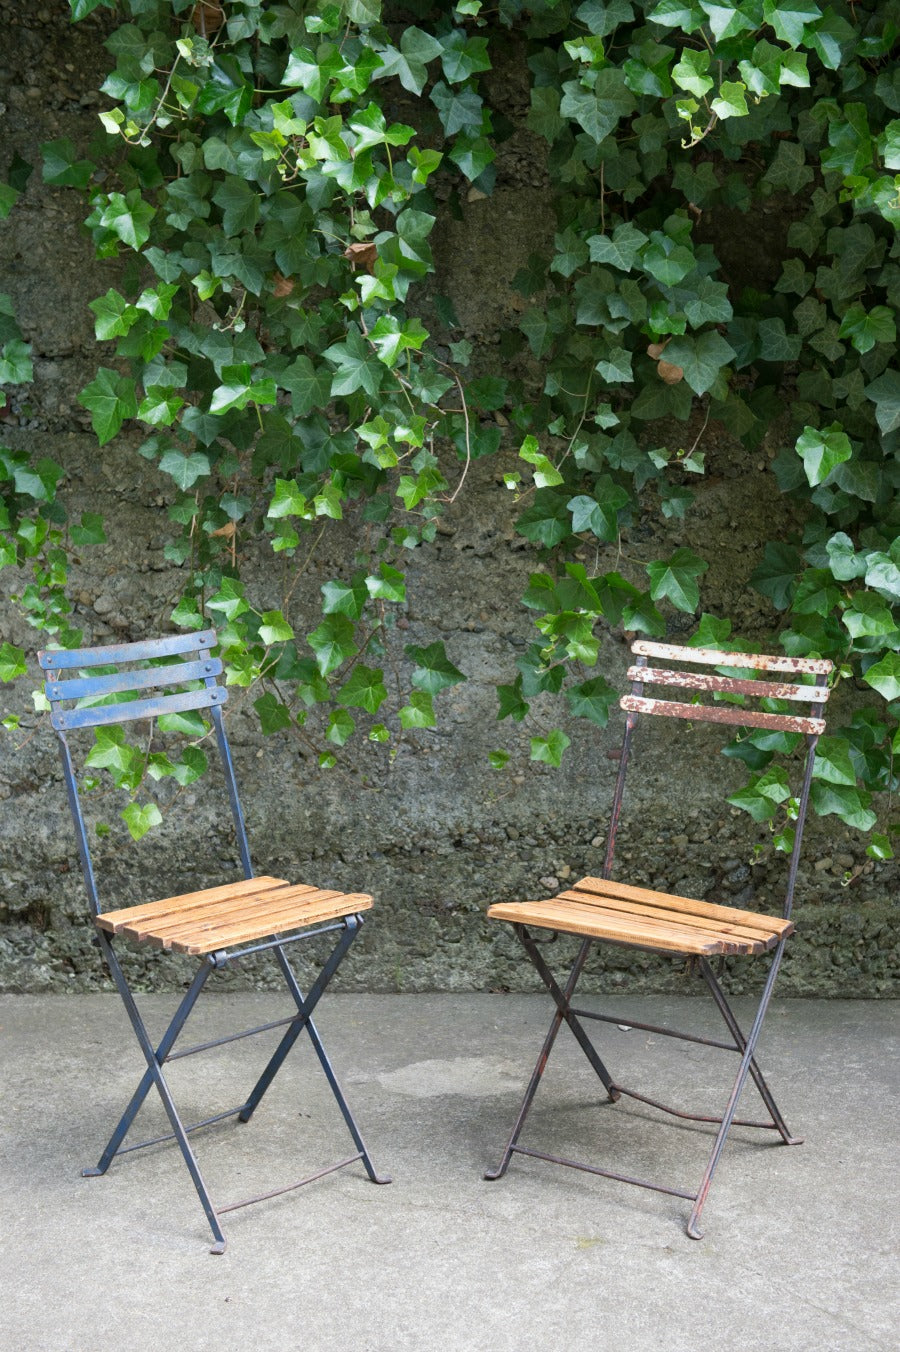 french bistro chairs